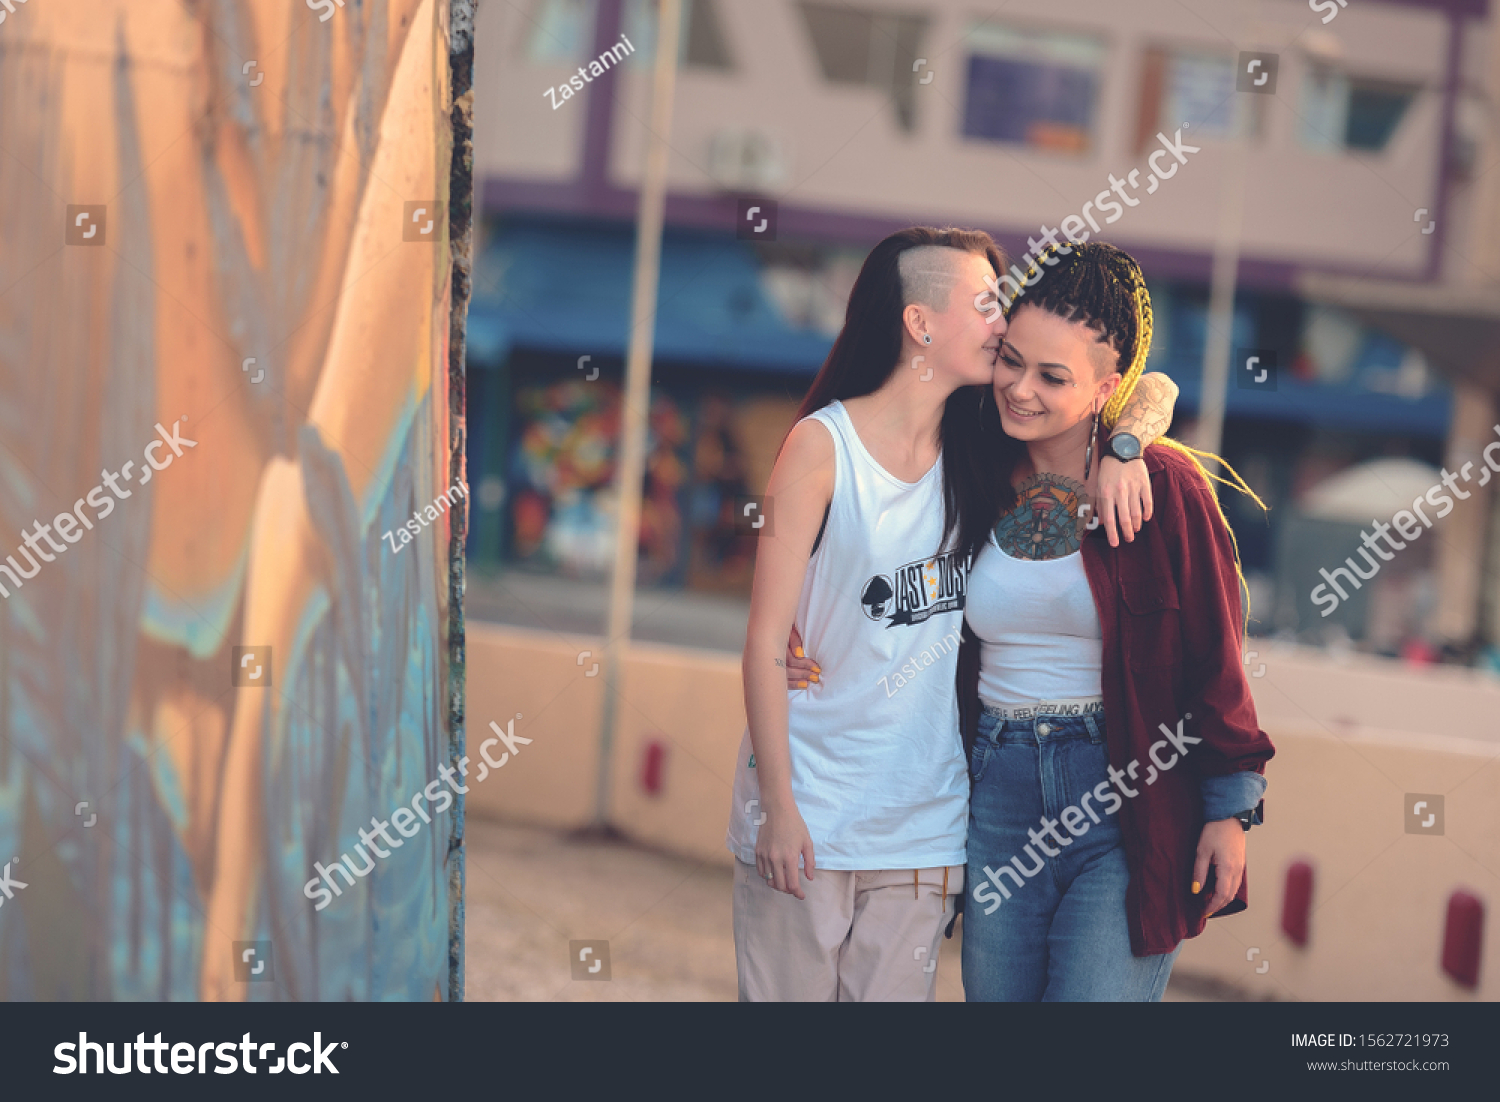 Curitiba / Paraná / Brazil - June 08, 2019: LGBTQ + in happy moments, fun with love. #1562721973